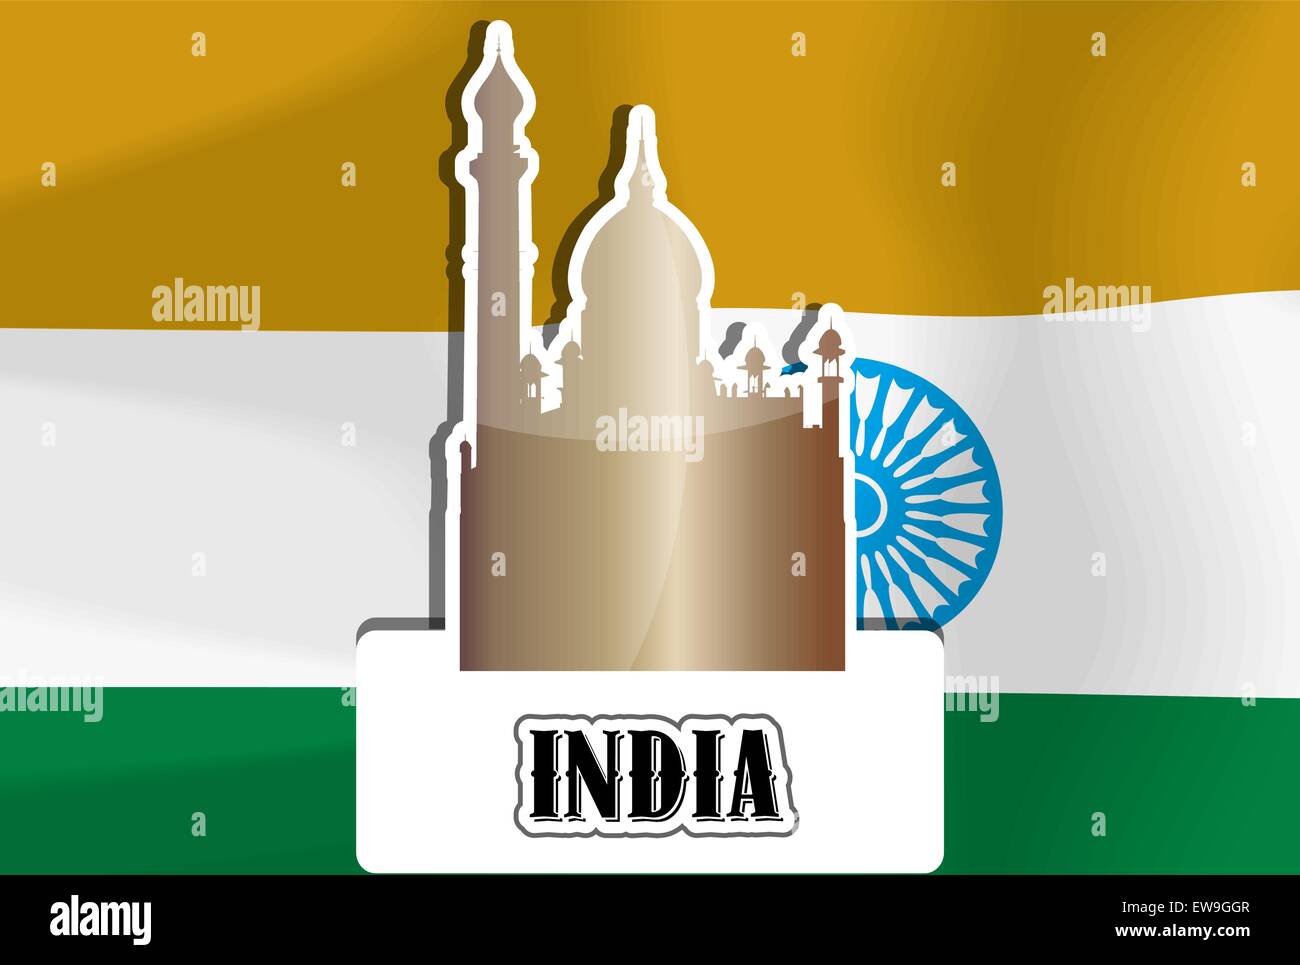 India, Indian Flag, Golden Temple, vector illustration Stock Vector